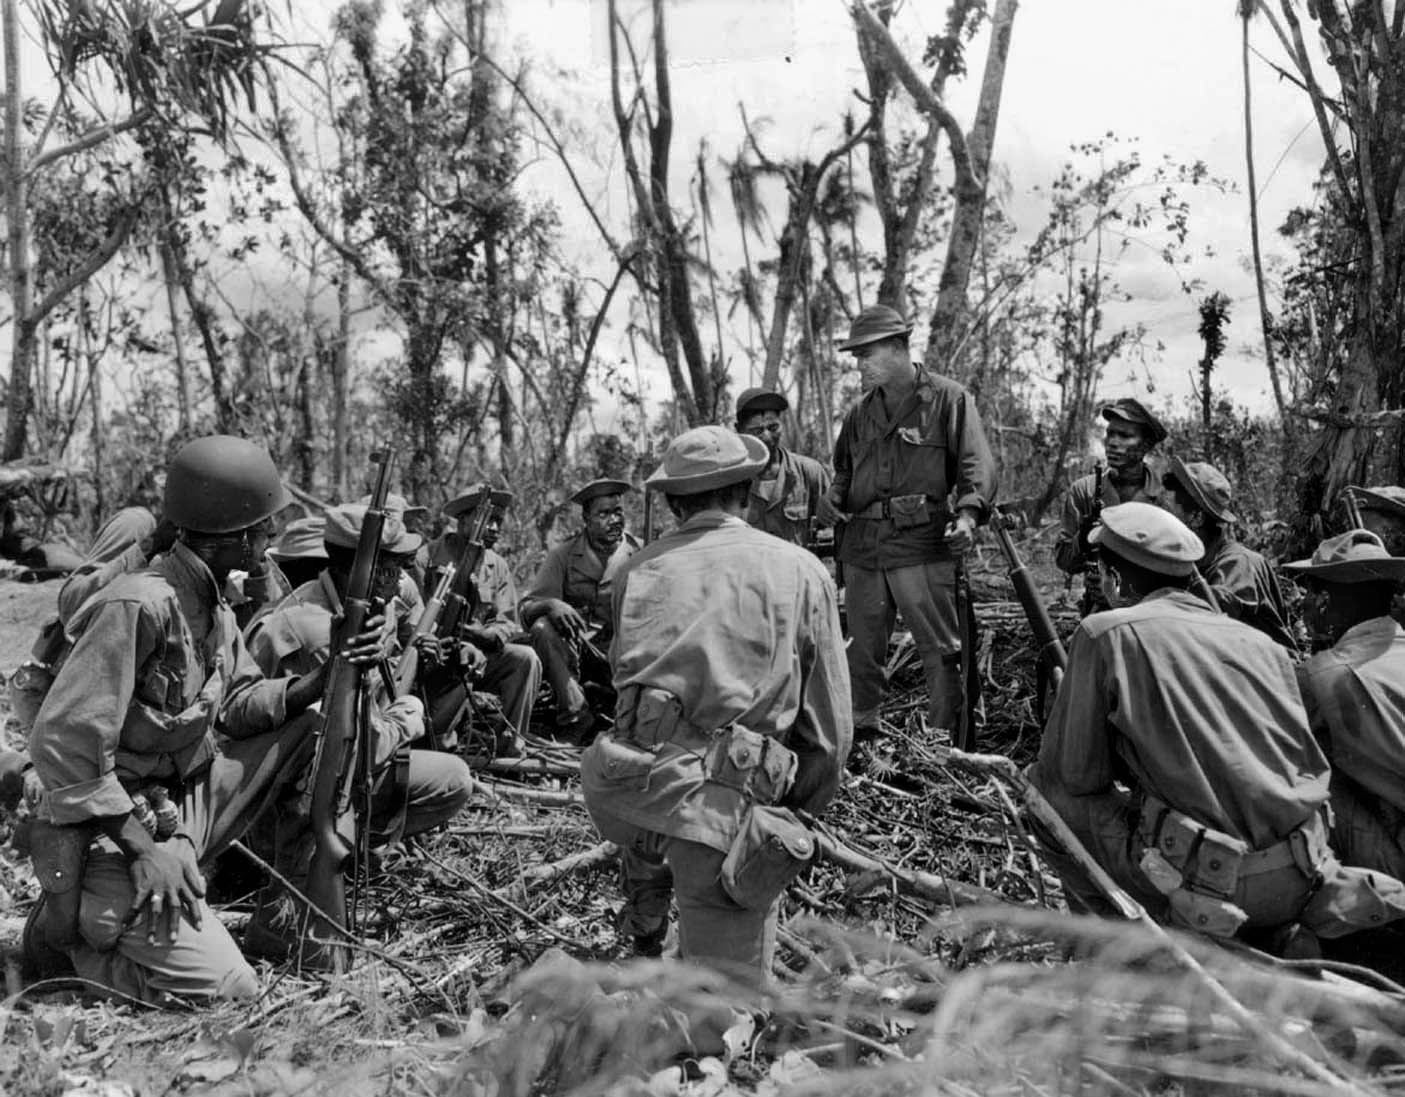 Members of the 1st Battalion, 24th Infantry are briefed by a white officer prior to heading out on a patrol in the Bougainville jungle, April 16, 1944.